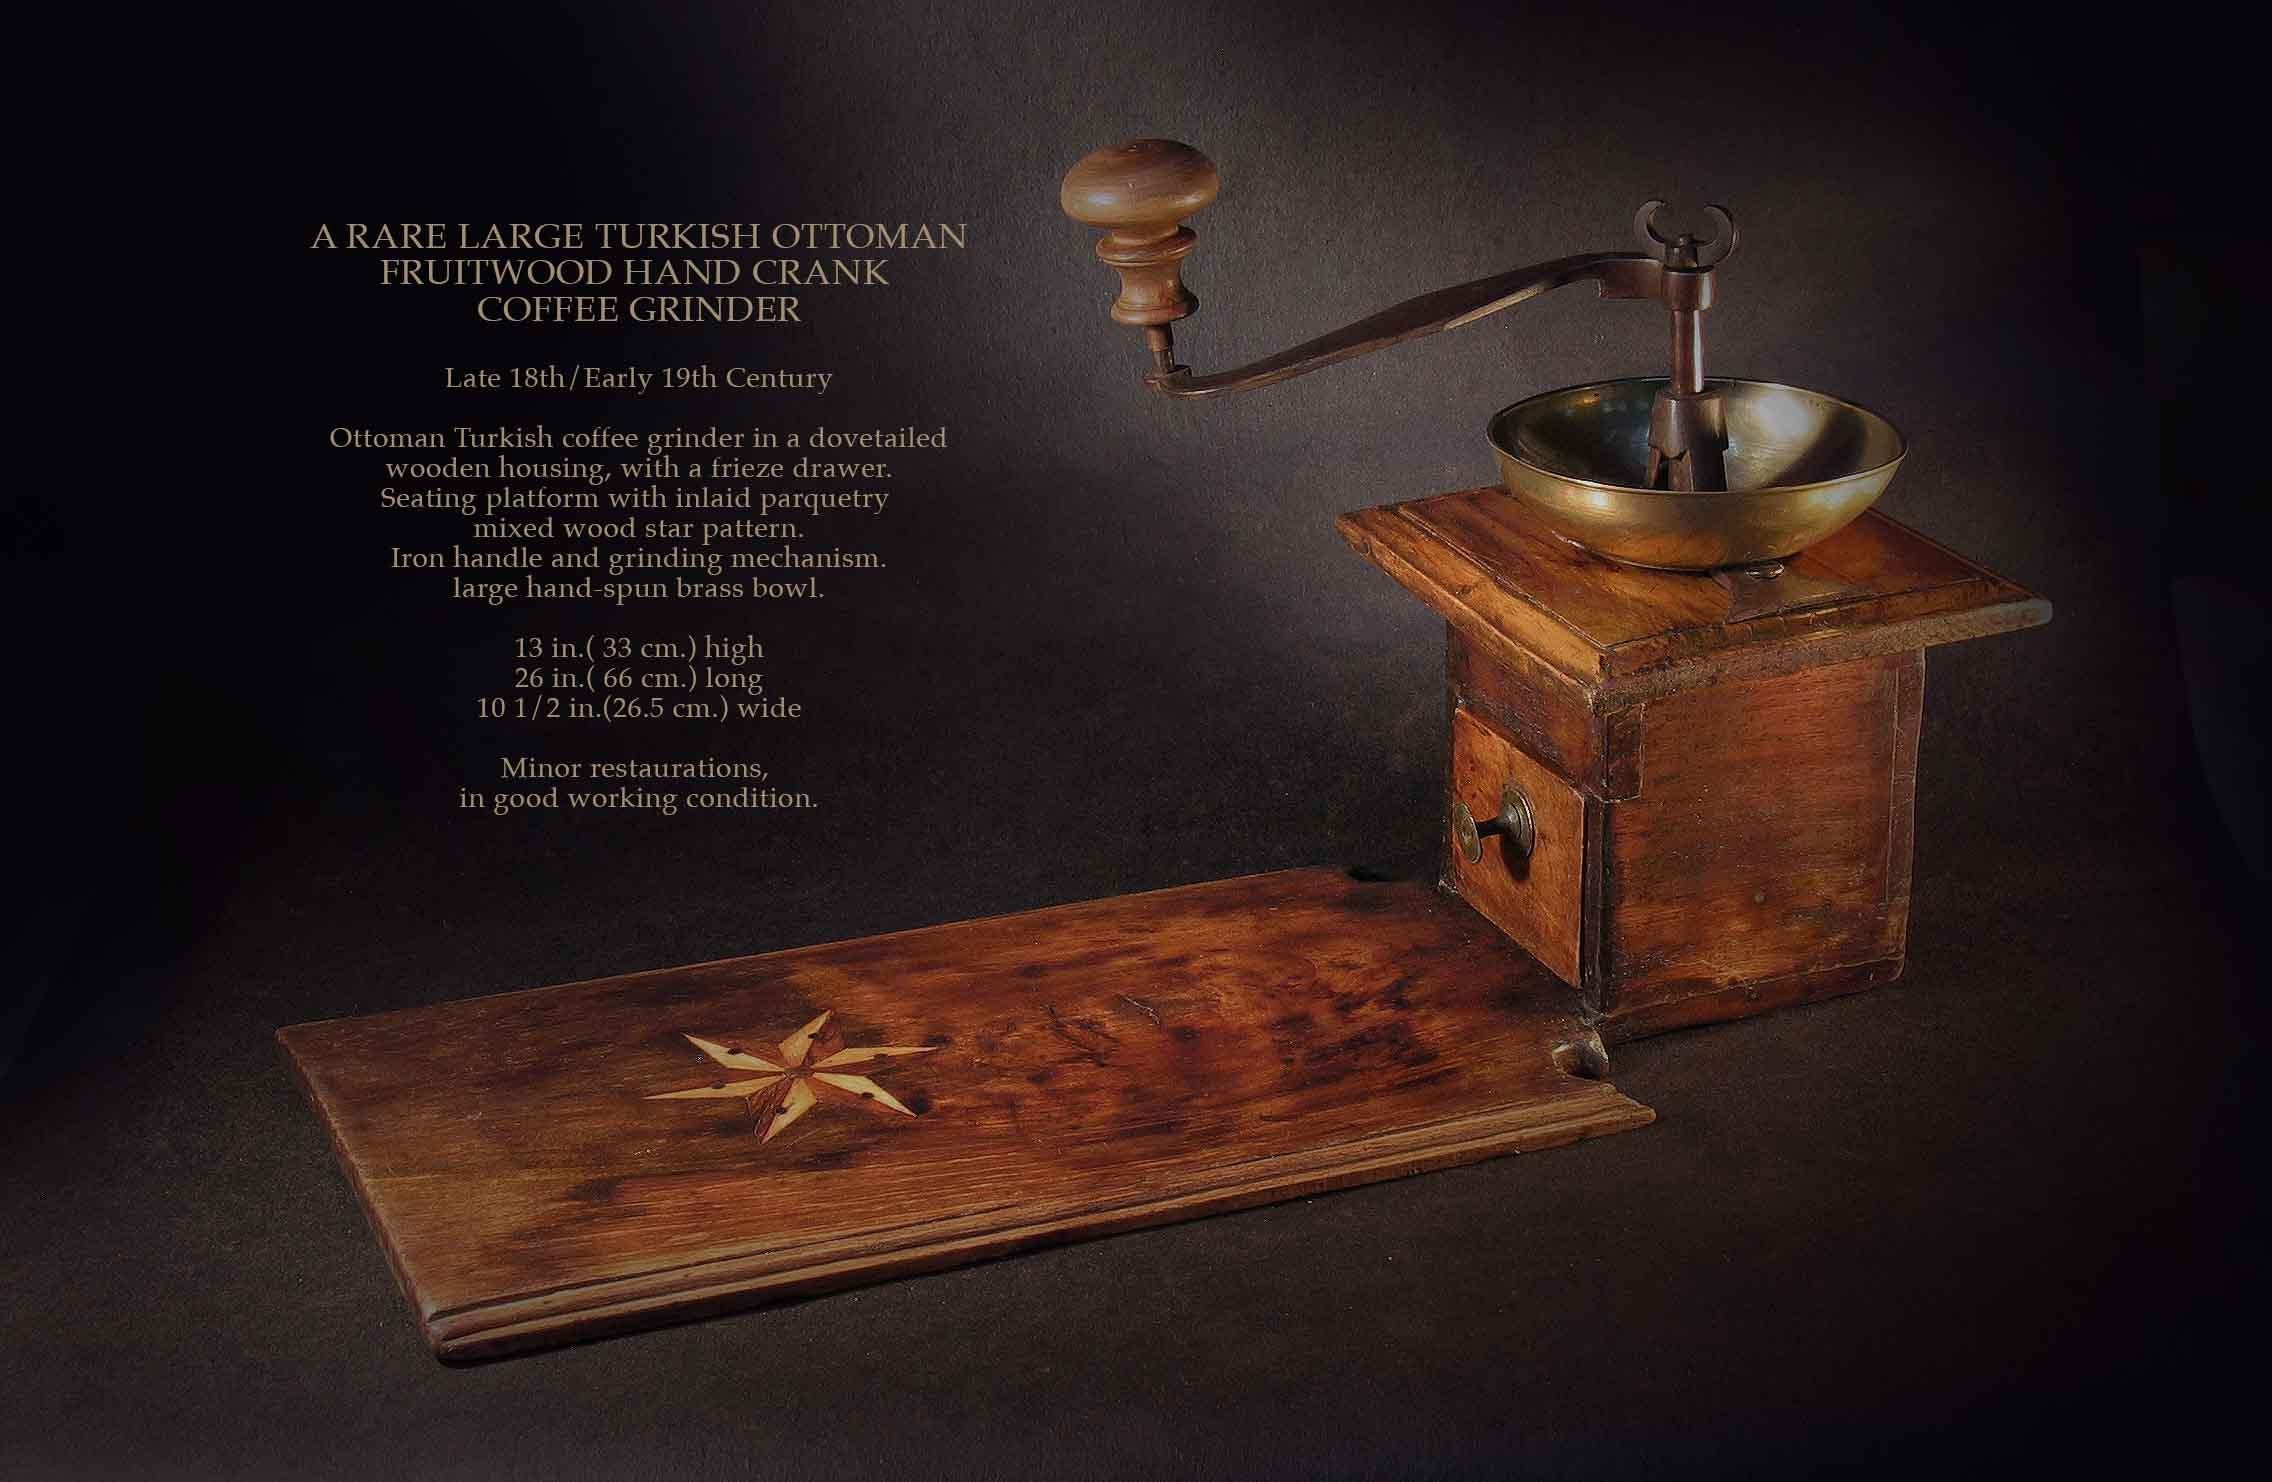 A RARE LARGE TURKISH OTTOMAN
FRUITWOOD HAND CRANK
COFFEE GRINDER

Late 18th/Early 19th Century.

Ottoman Turkish coffee grinder in a dovetailed
wooden housing, with a frieze drawer.
Seating platform with inlaid parquetry
mixed wood star